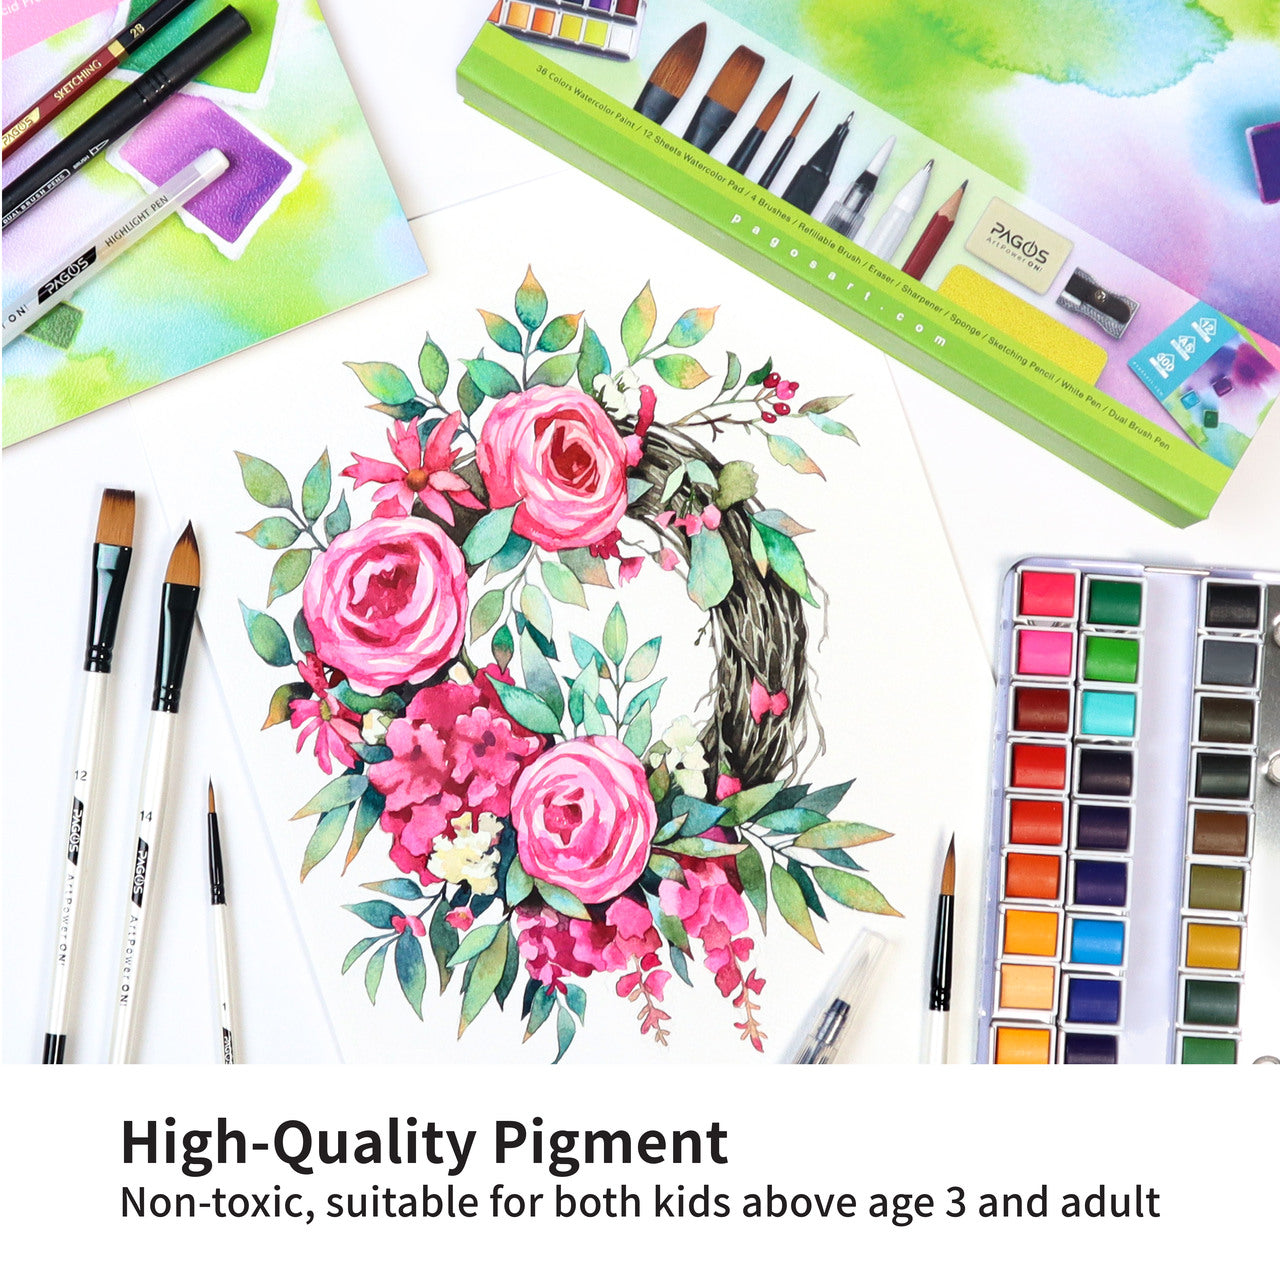 Pagos Artist Quality All-In-One Watercolor Set